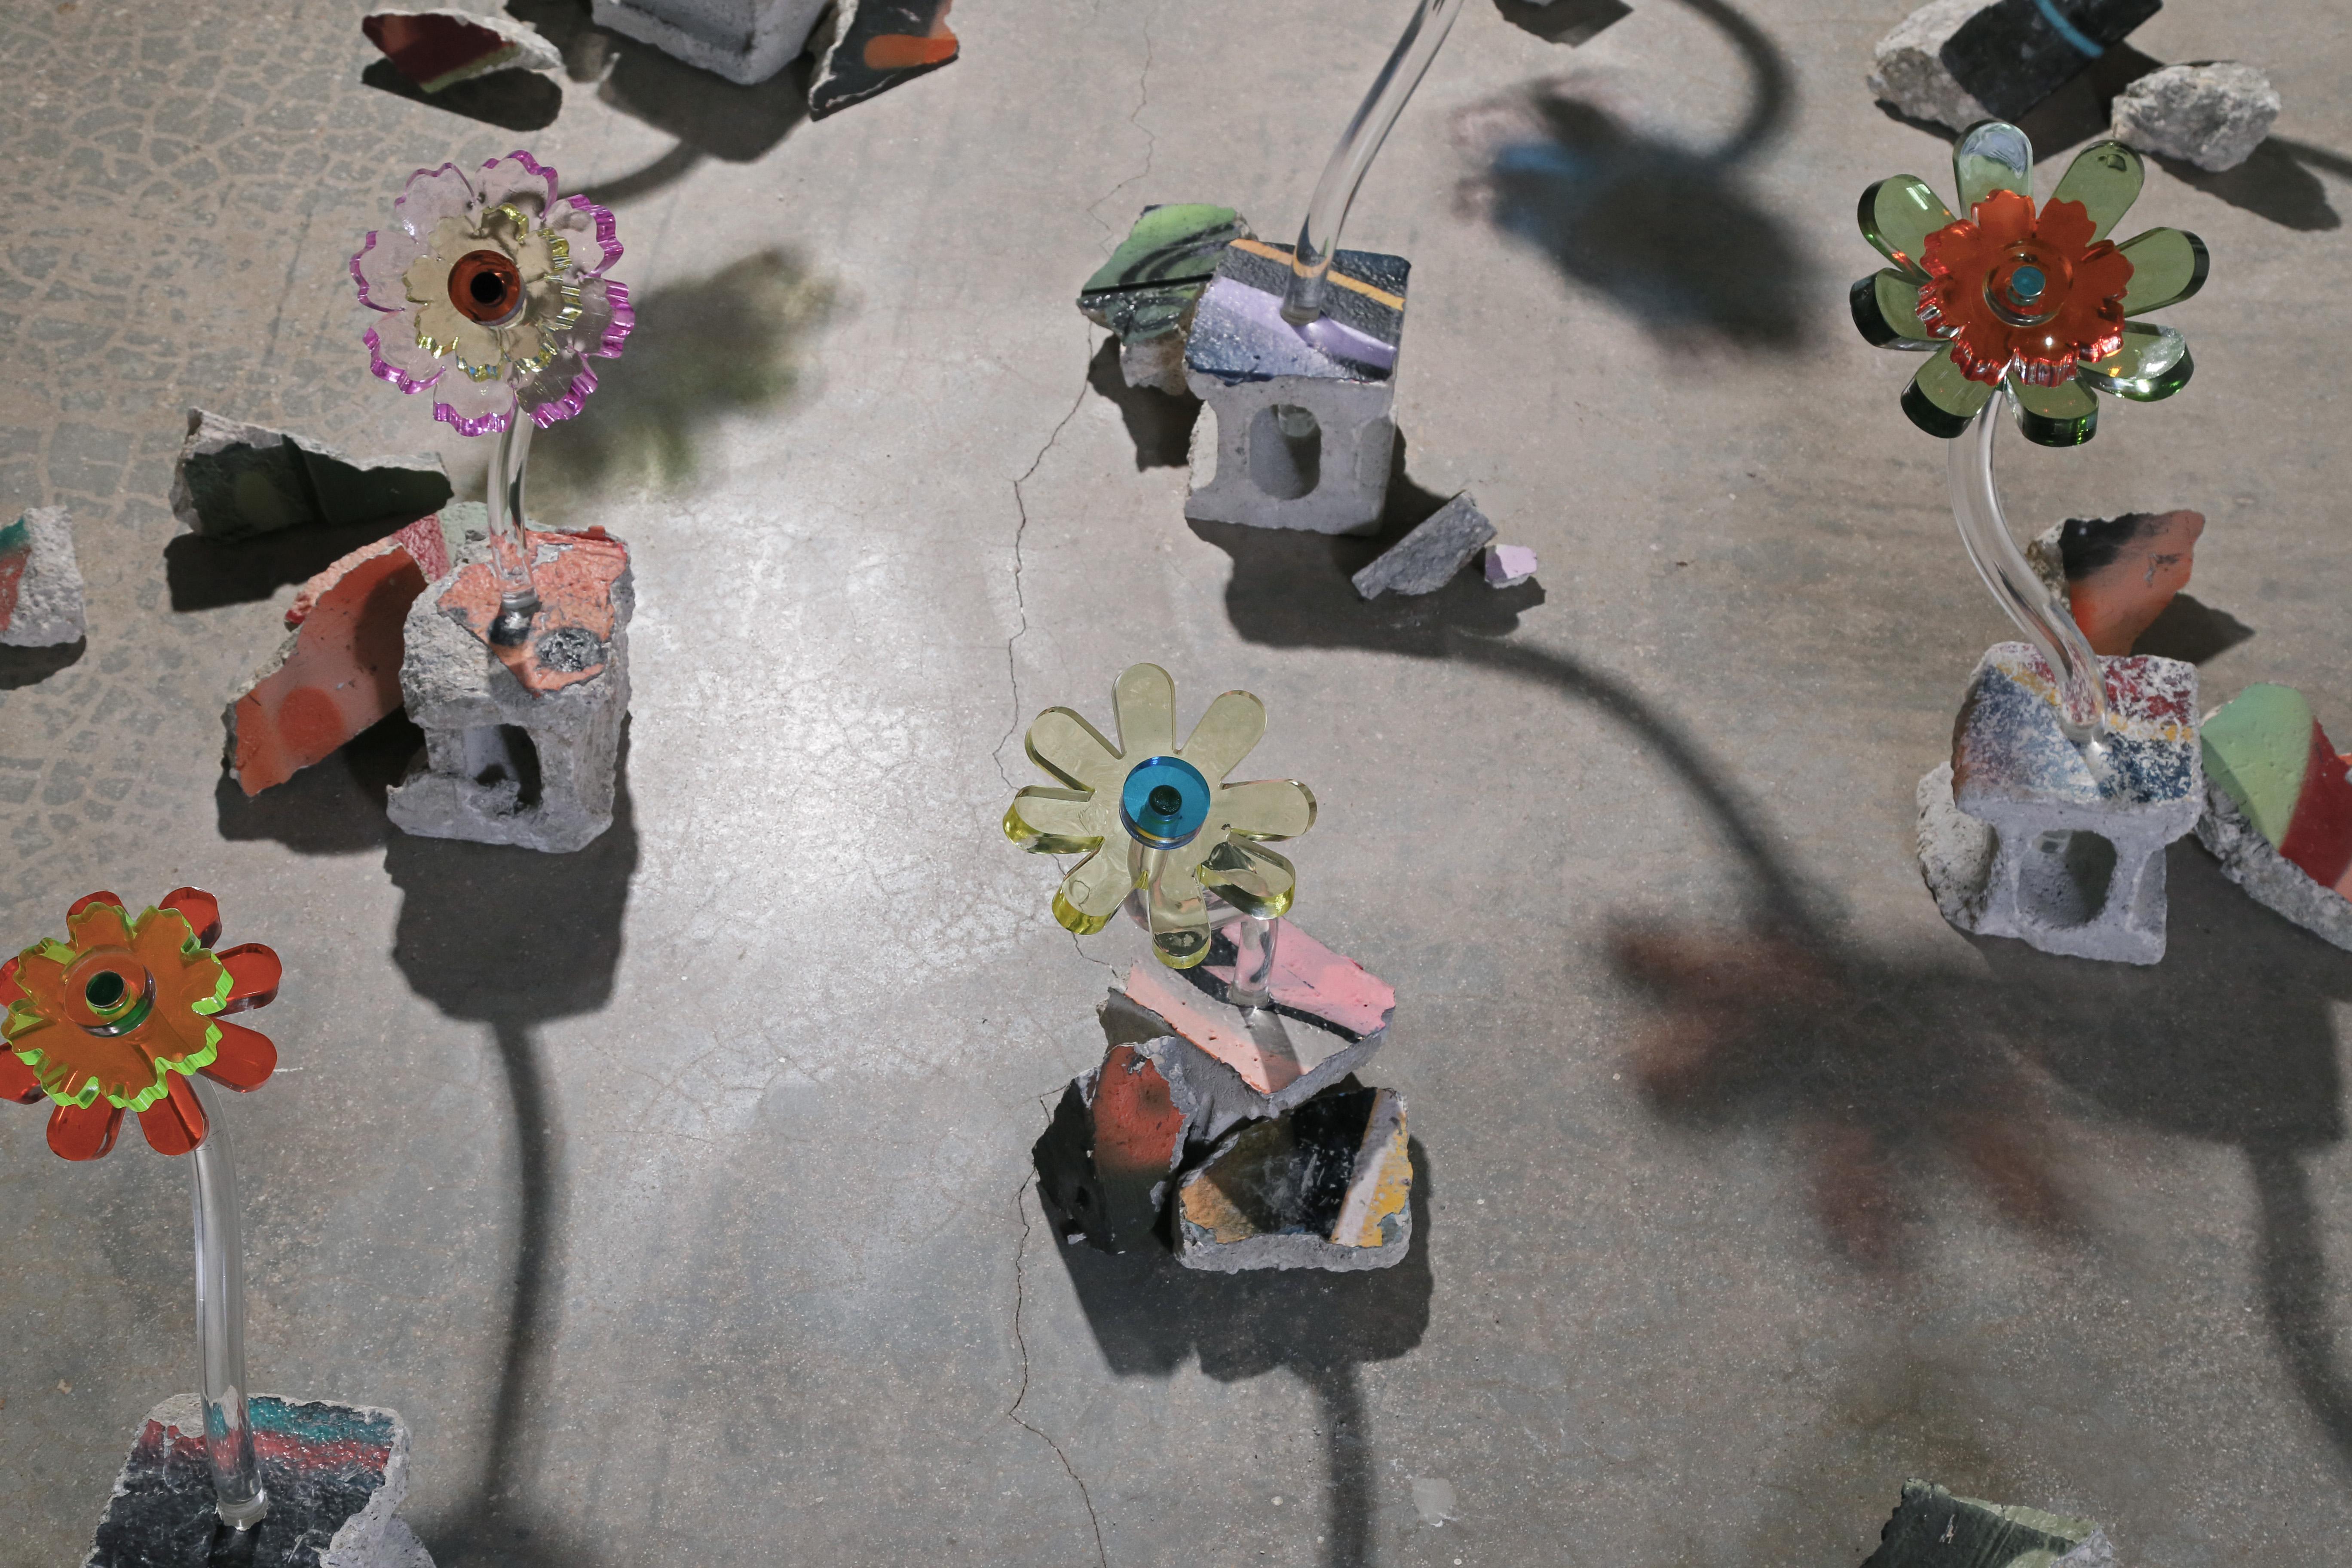 The Flora sculptures are part of the Fossils series. Oversized acrylic flower sculptures are combined with repurposed painted concrete rubble from demolished buildings, allowing the artist to pay tribute to the past, while looking to the future. In